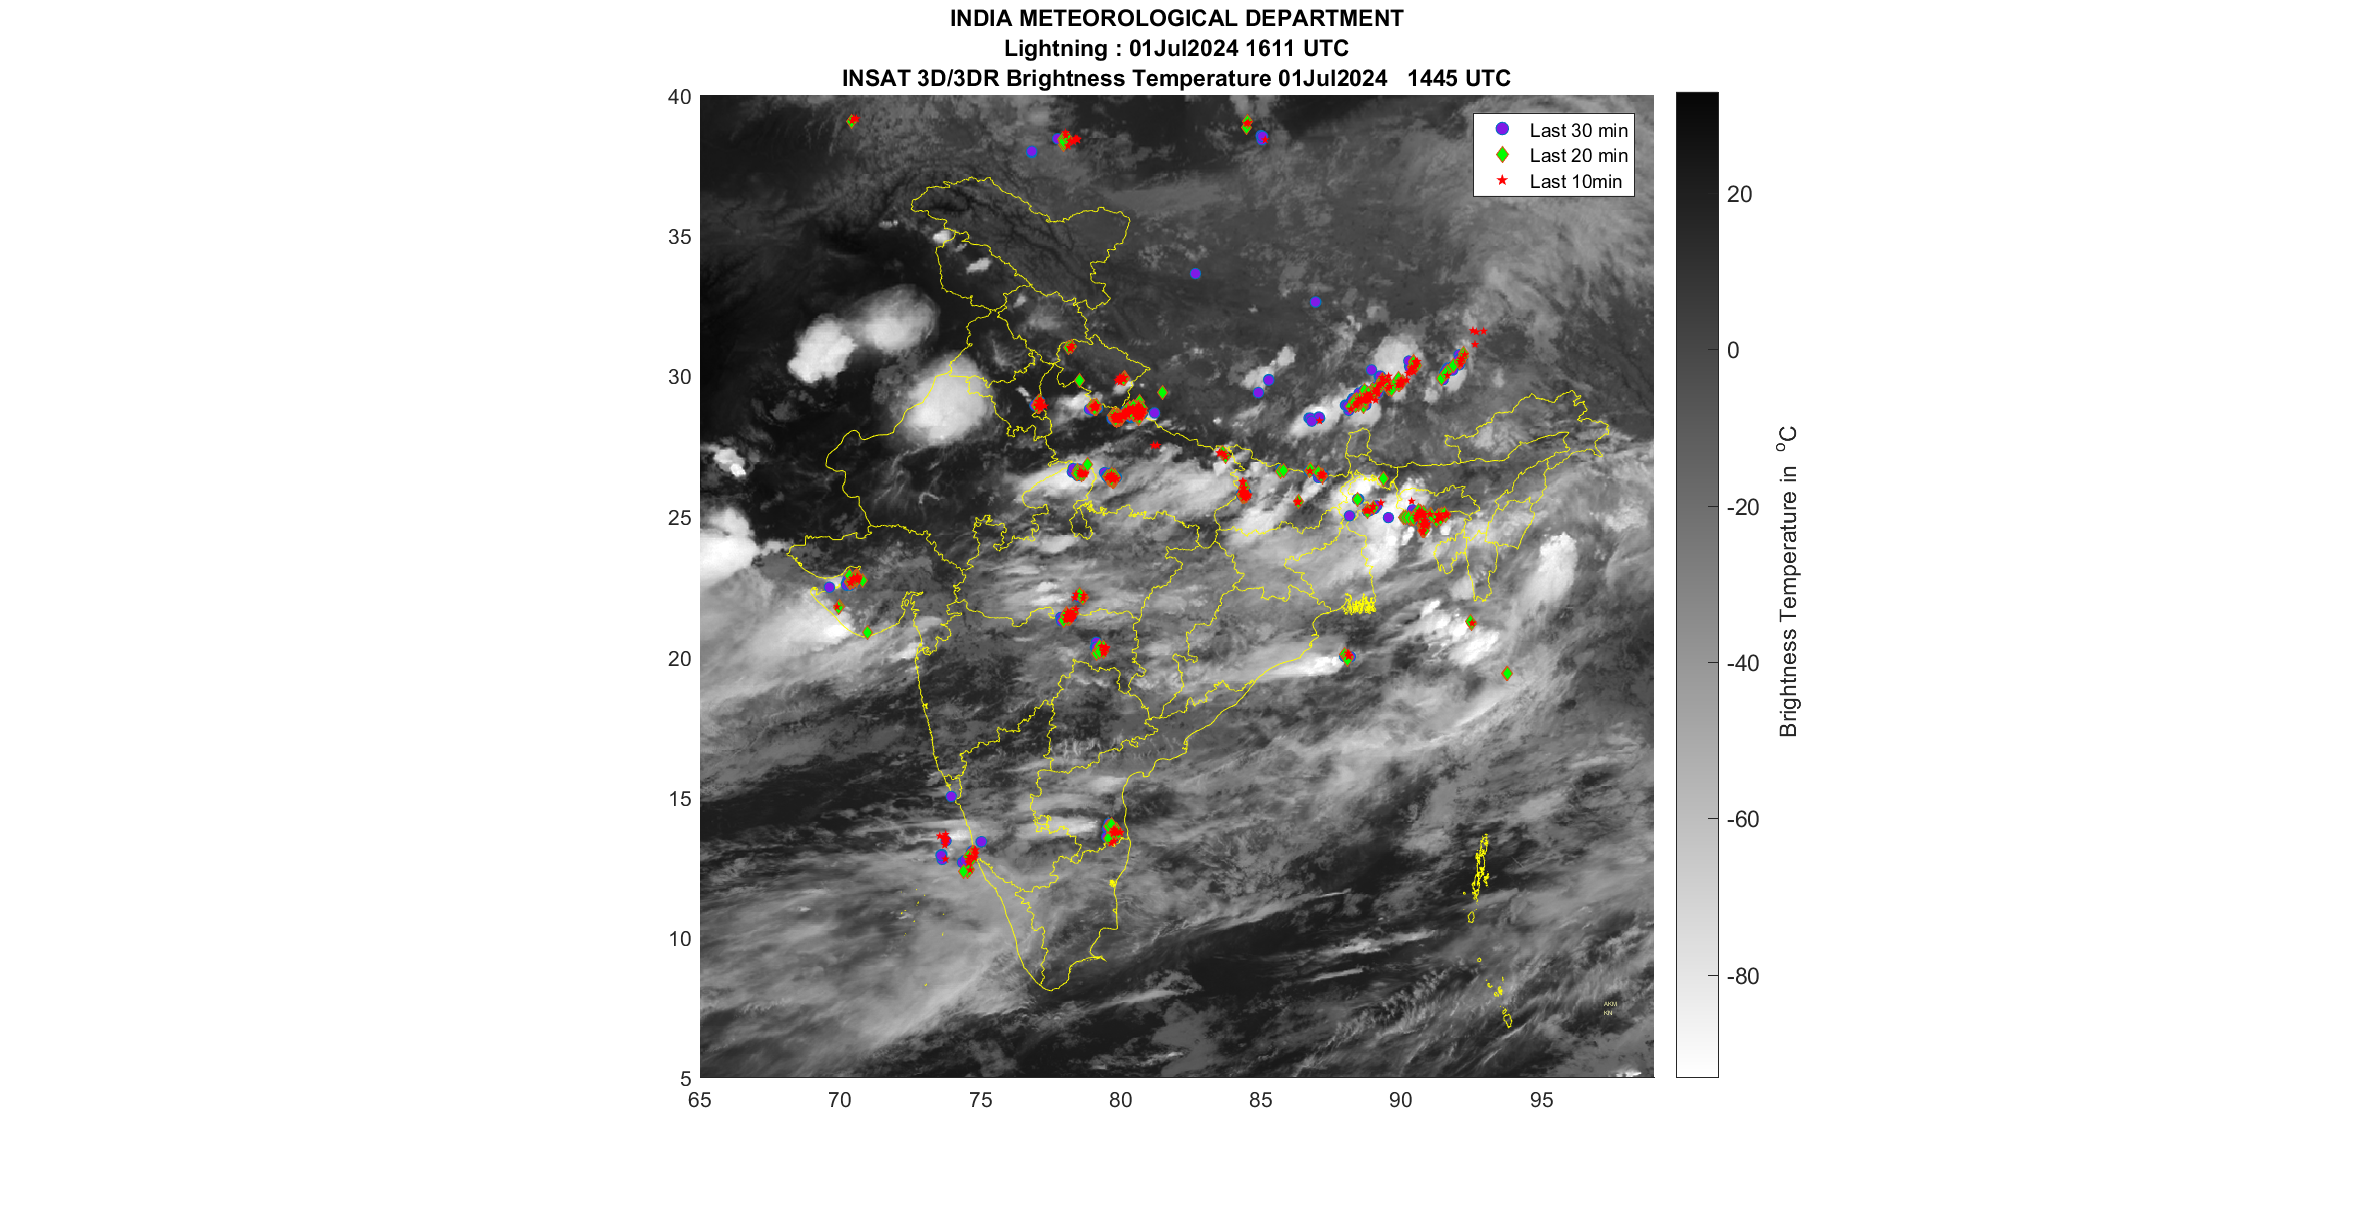 INDIA METEOROLOGICAL DEPARTMENT Ministry of Earth Sciences LIGHTNING WITH  INSAT-3D DATA AND IMD RADARS